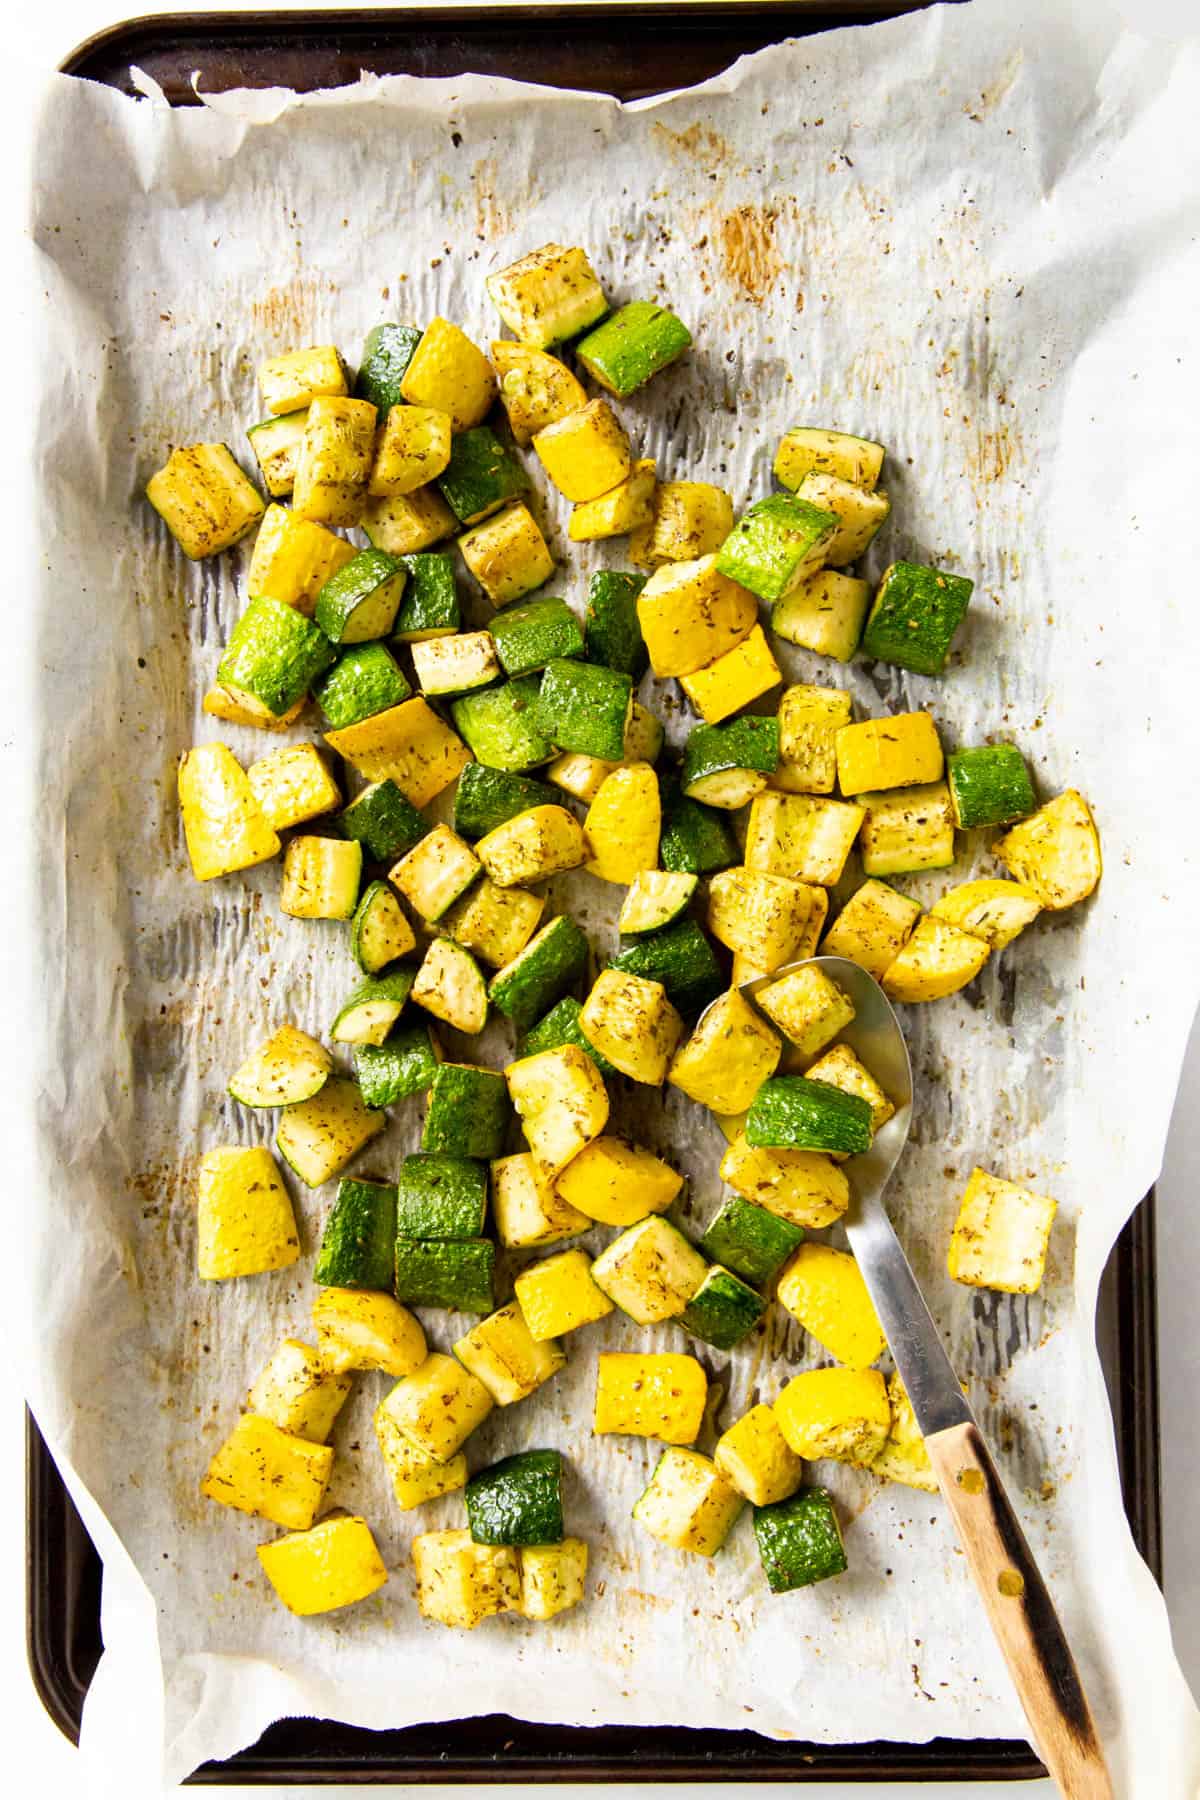 zucchini and squash pieces on a sheet pan after baking